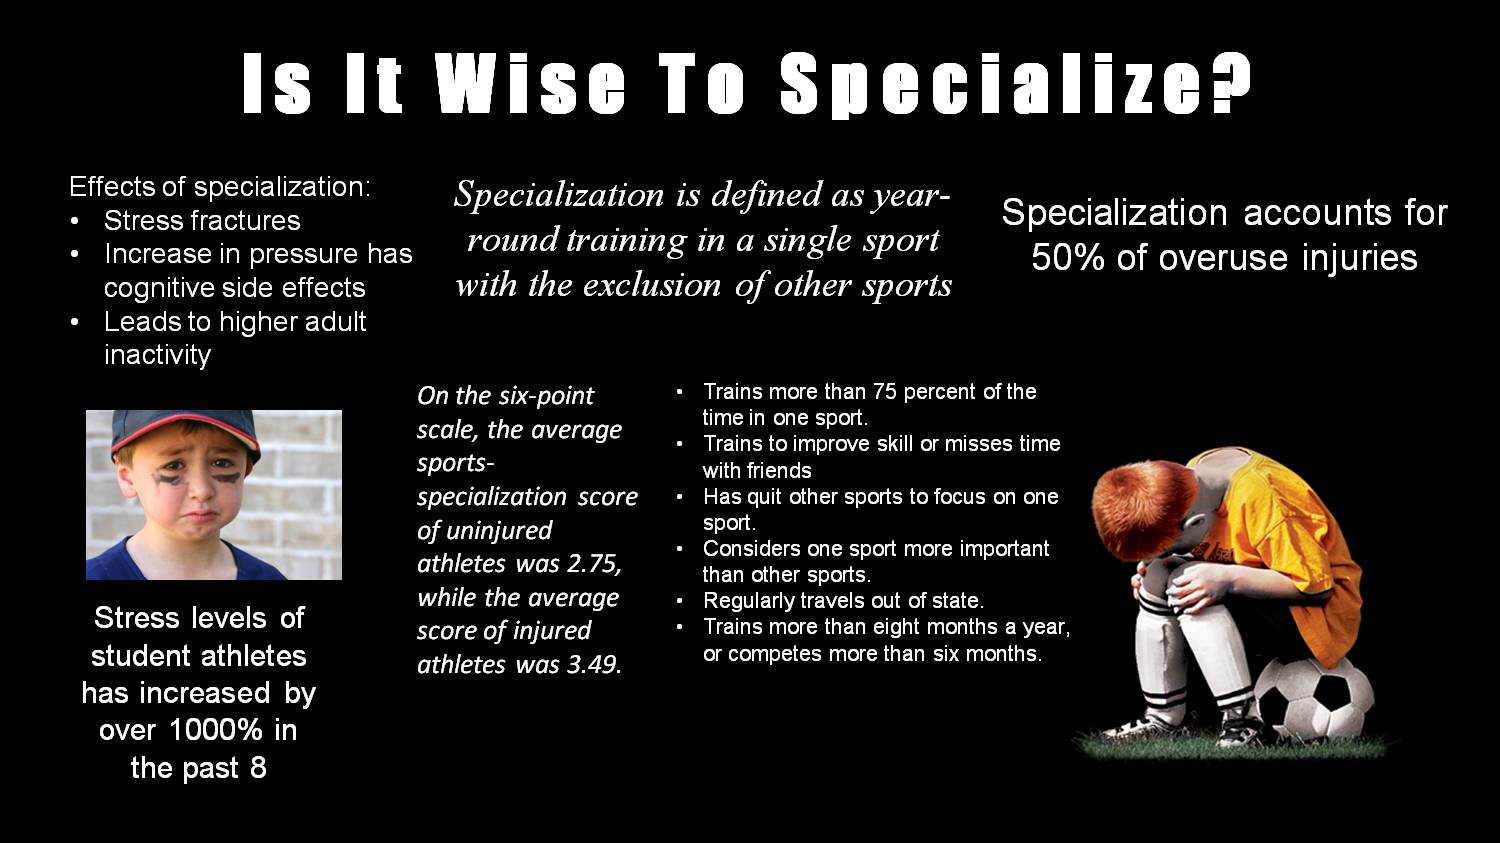 Is It Wise To Specialize? by lrq32